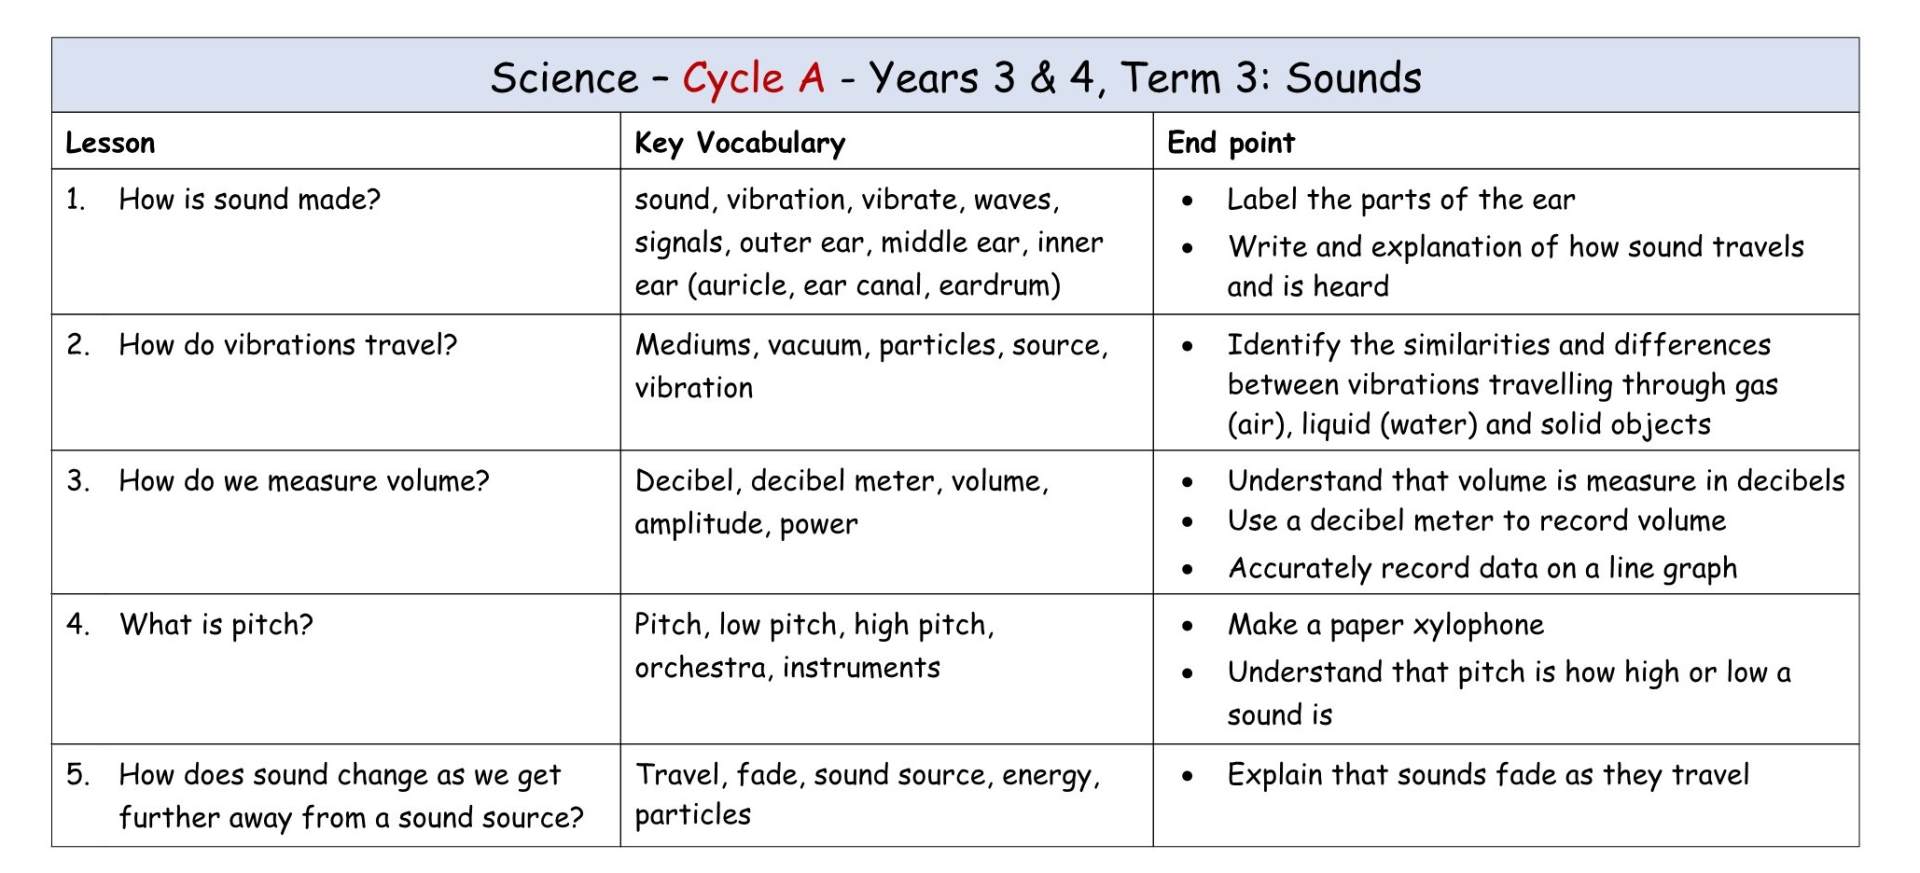 Science Y3-4 Cycle A MTP T3